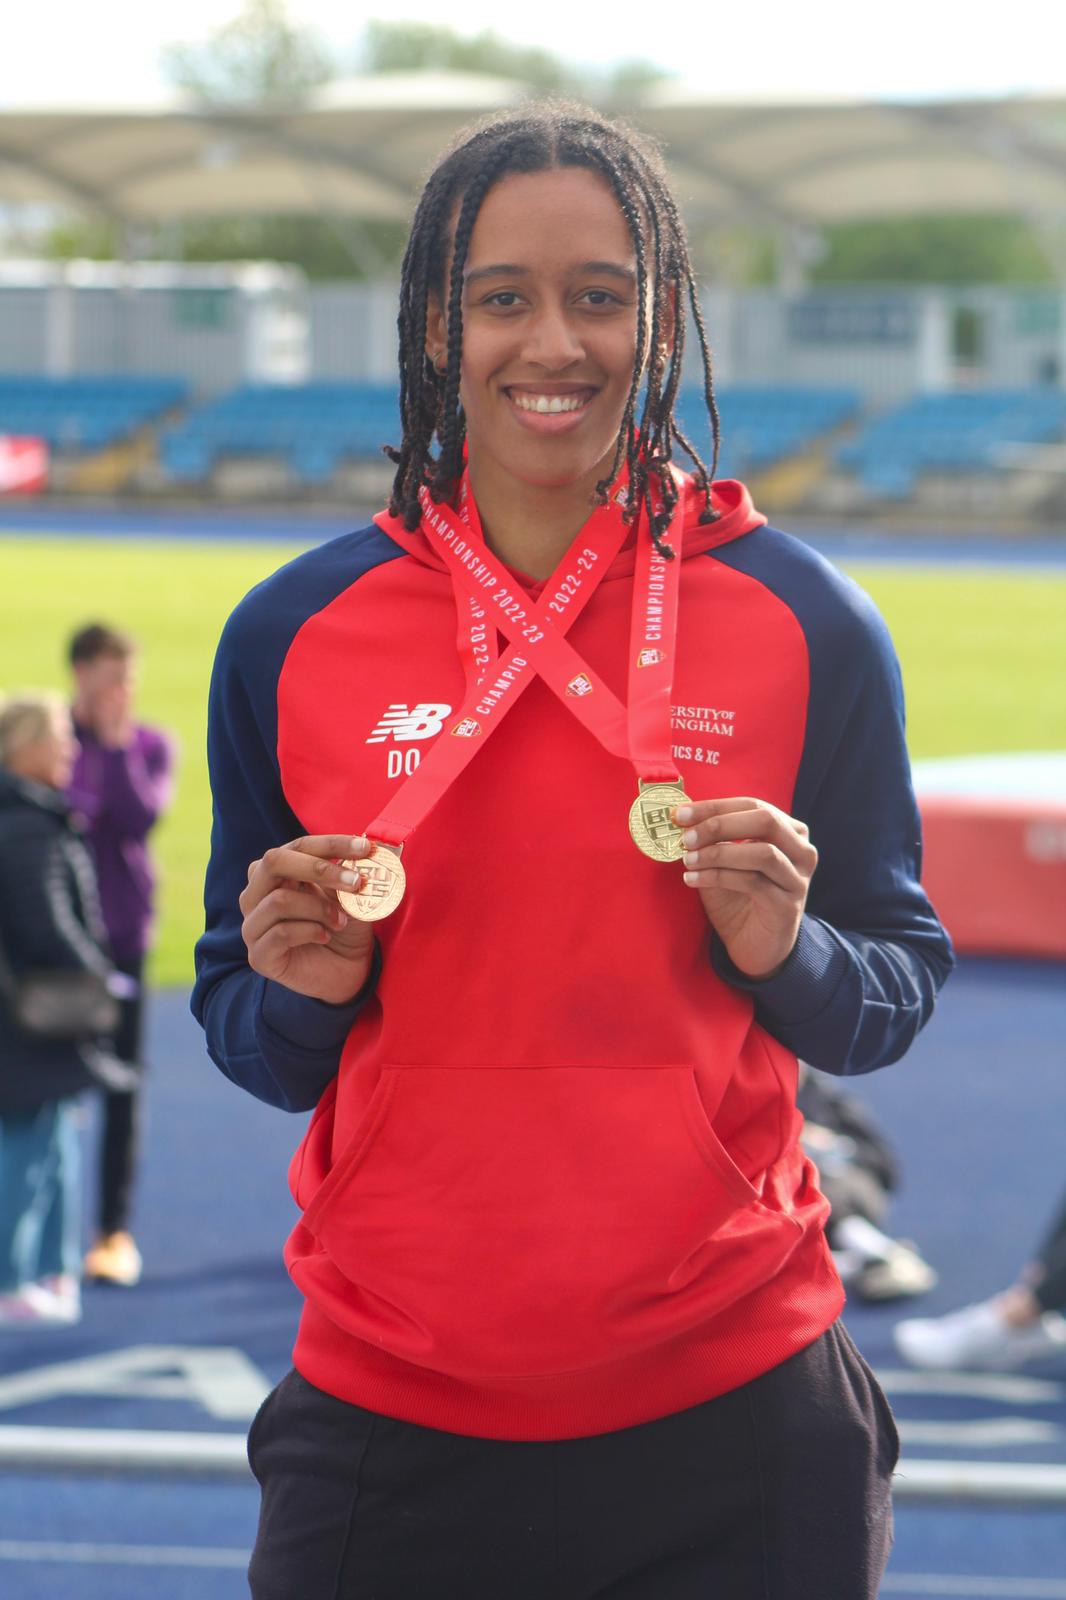 Athletics member with medal